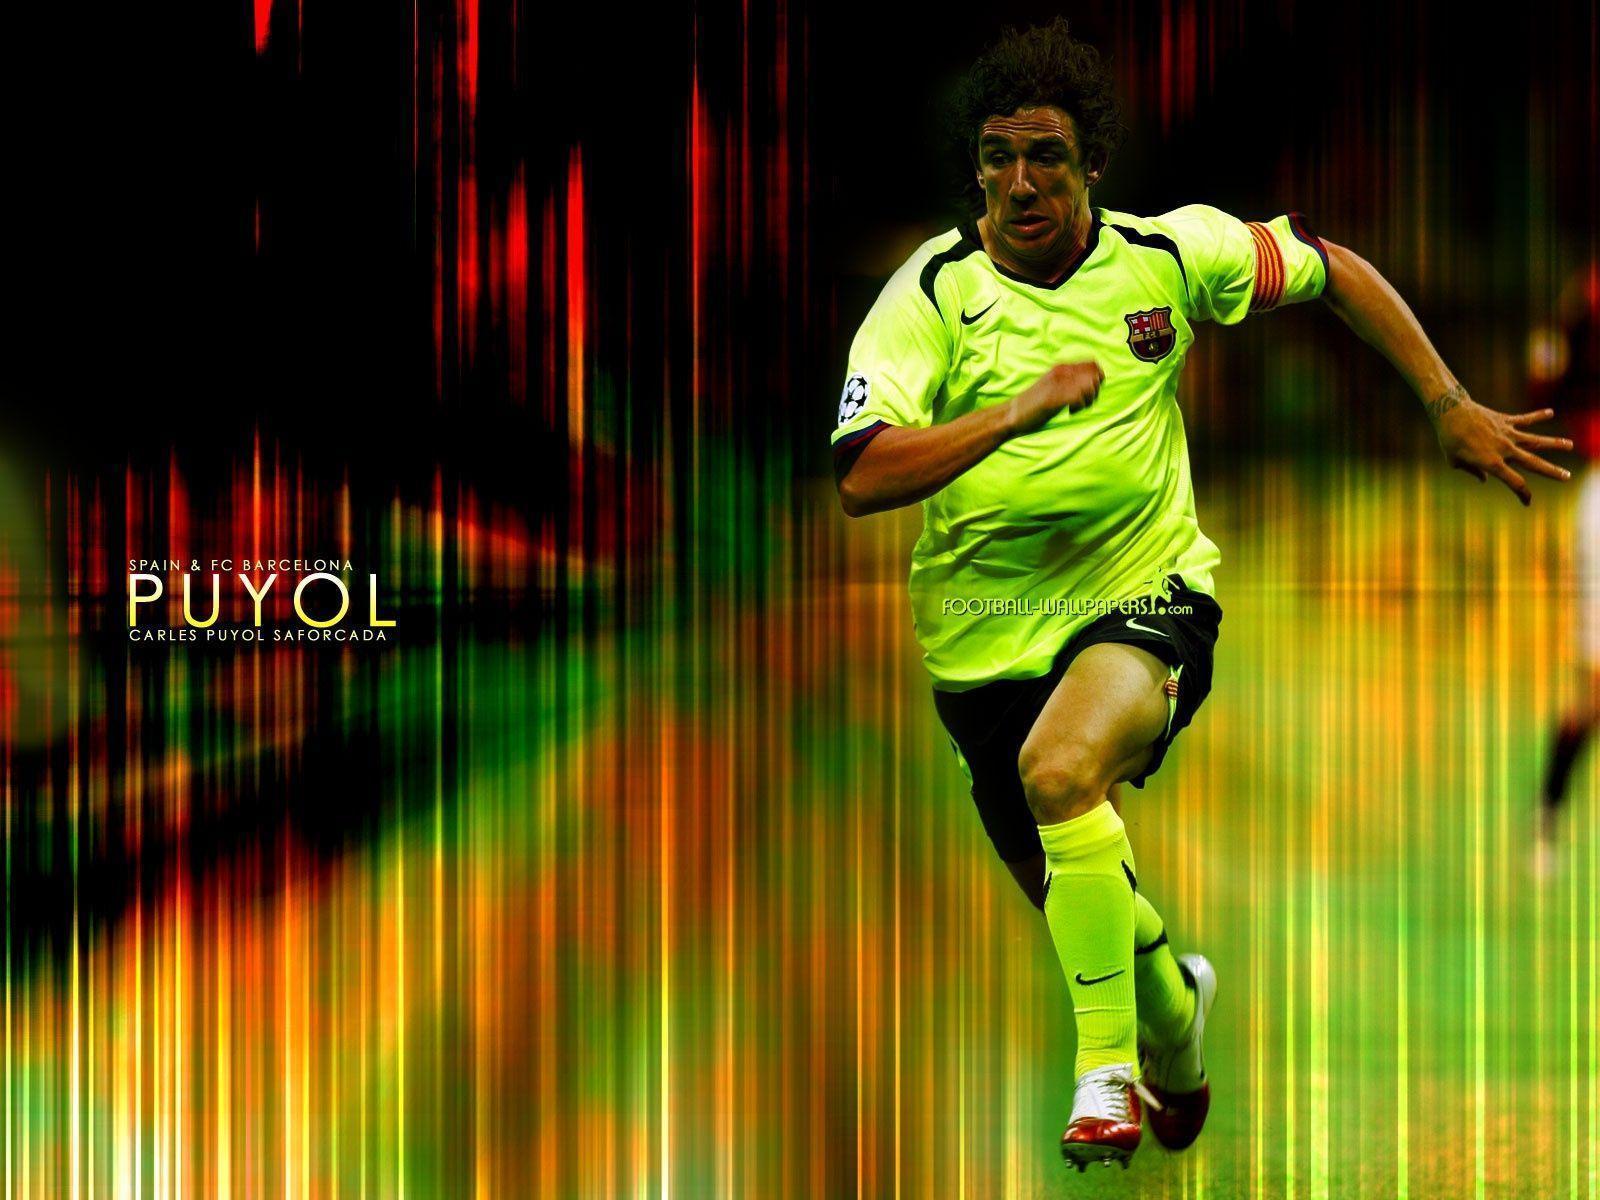 The best player of Barcelona Carles Puyol wallpaper and image